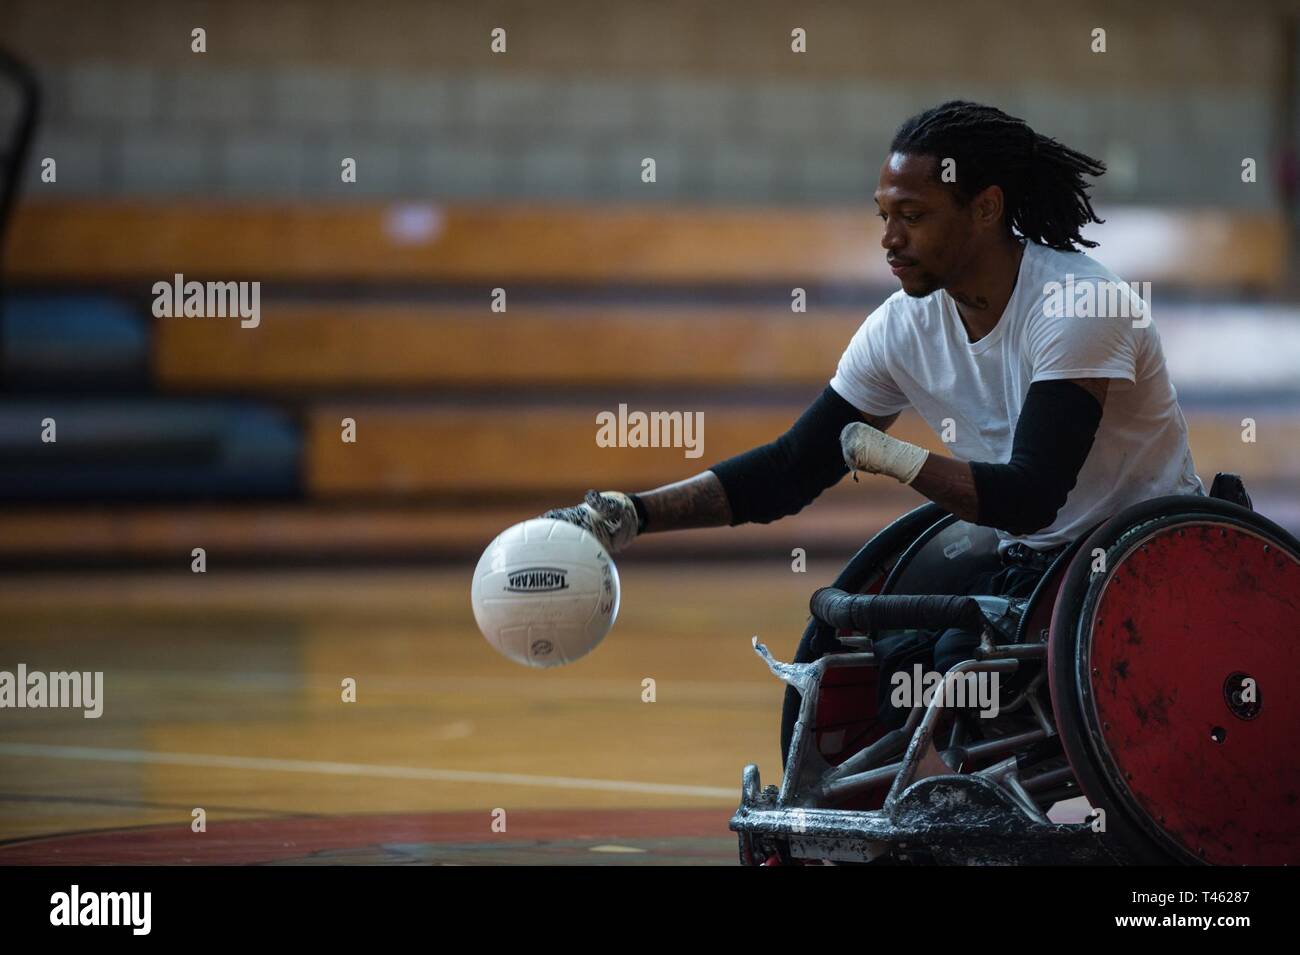 Wheelchair Rugby Coach Anthony McDaniel demonstrates rugby techniques during the 2019 Marine Corps Trials at Marine Corps Base Camp Pendleton, California, Feb. 28.  The Marine Corps Trials promotes recovery and rehabilitation through adaptive sports participation and develops camaraderie among recovering service members and veterans. Additionally, the competition is an opportunity for participants to demonstrate physical and mental achievements and serves as the primary venue to select Marine Corps participants for the DoD Warrior Games. Stock Photo